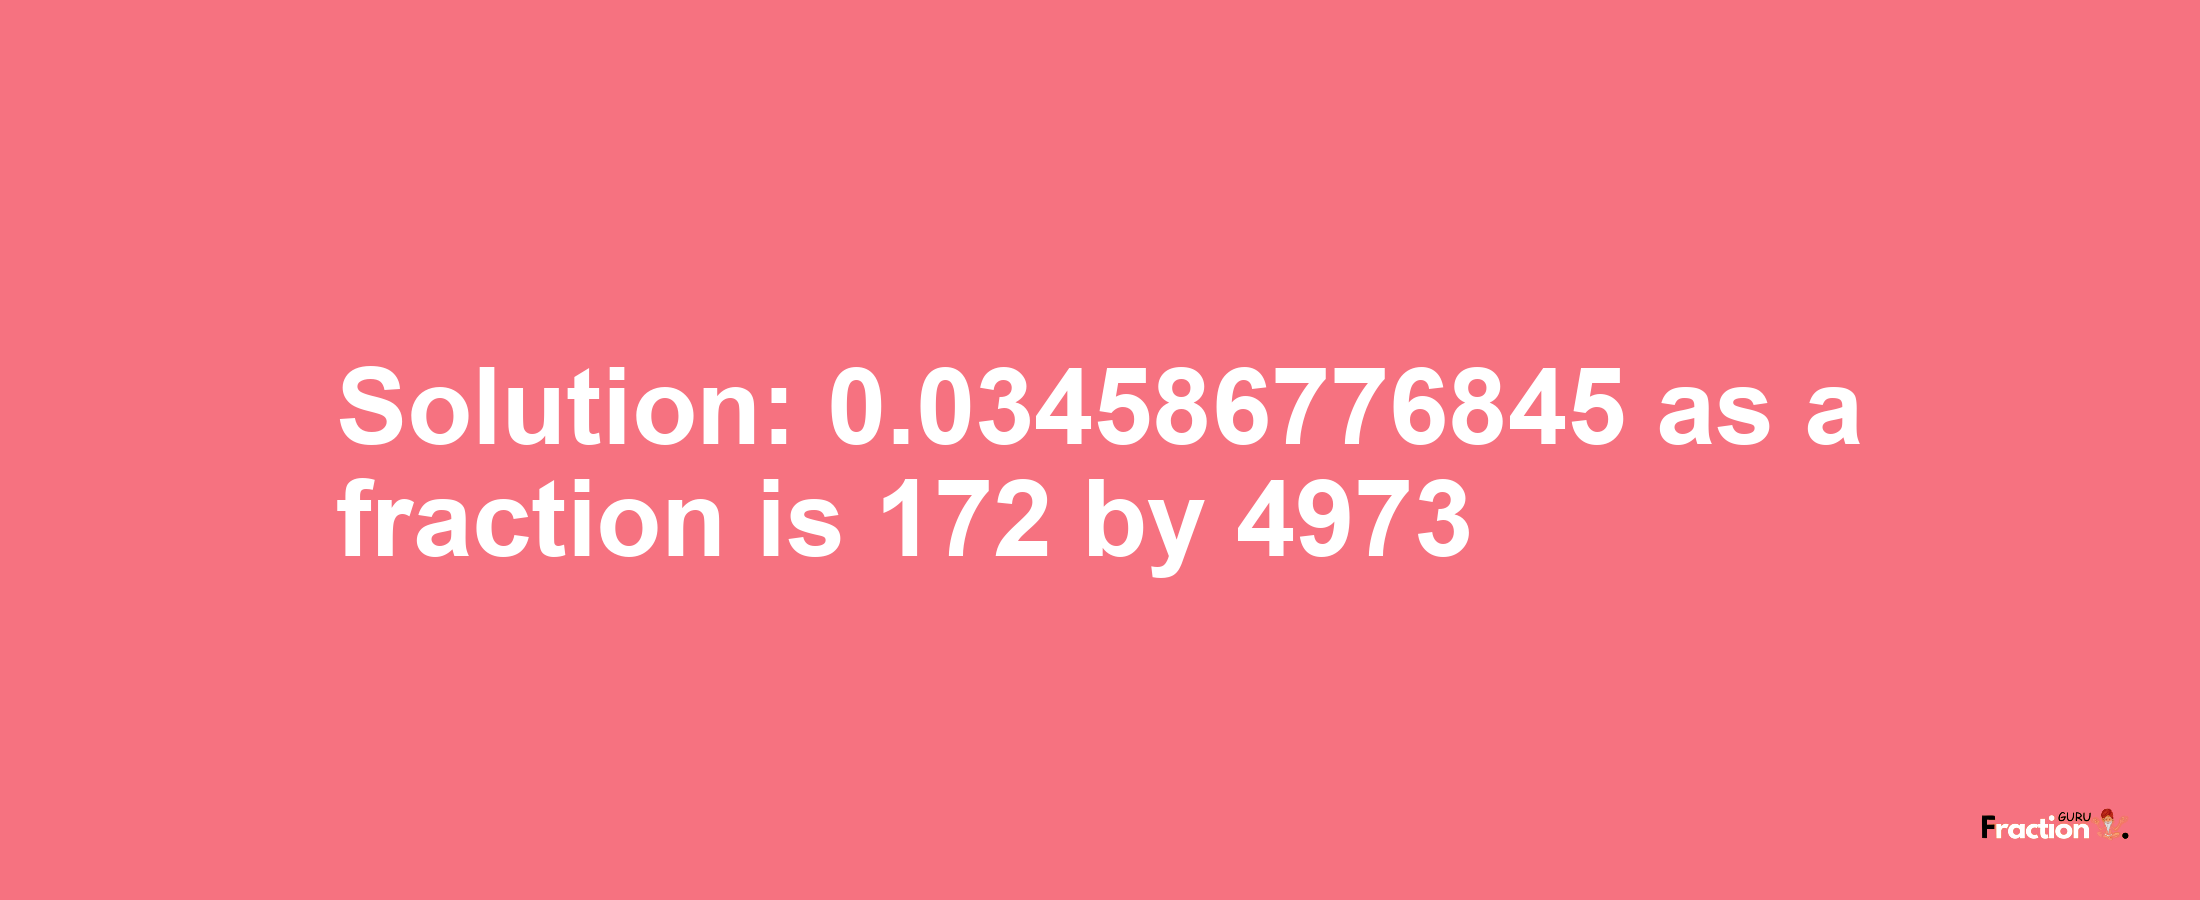 Solution:0.034586776845 as a fraction is 172/4973